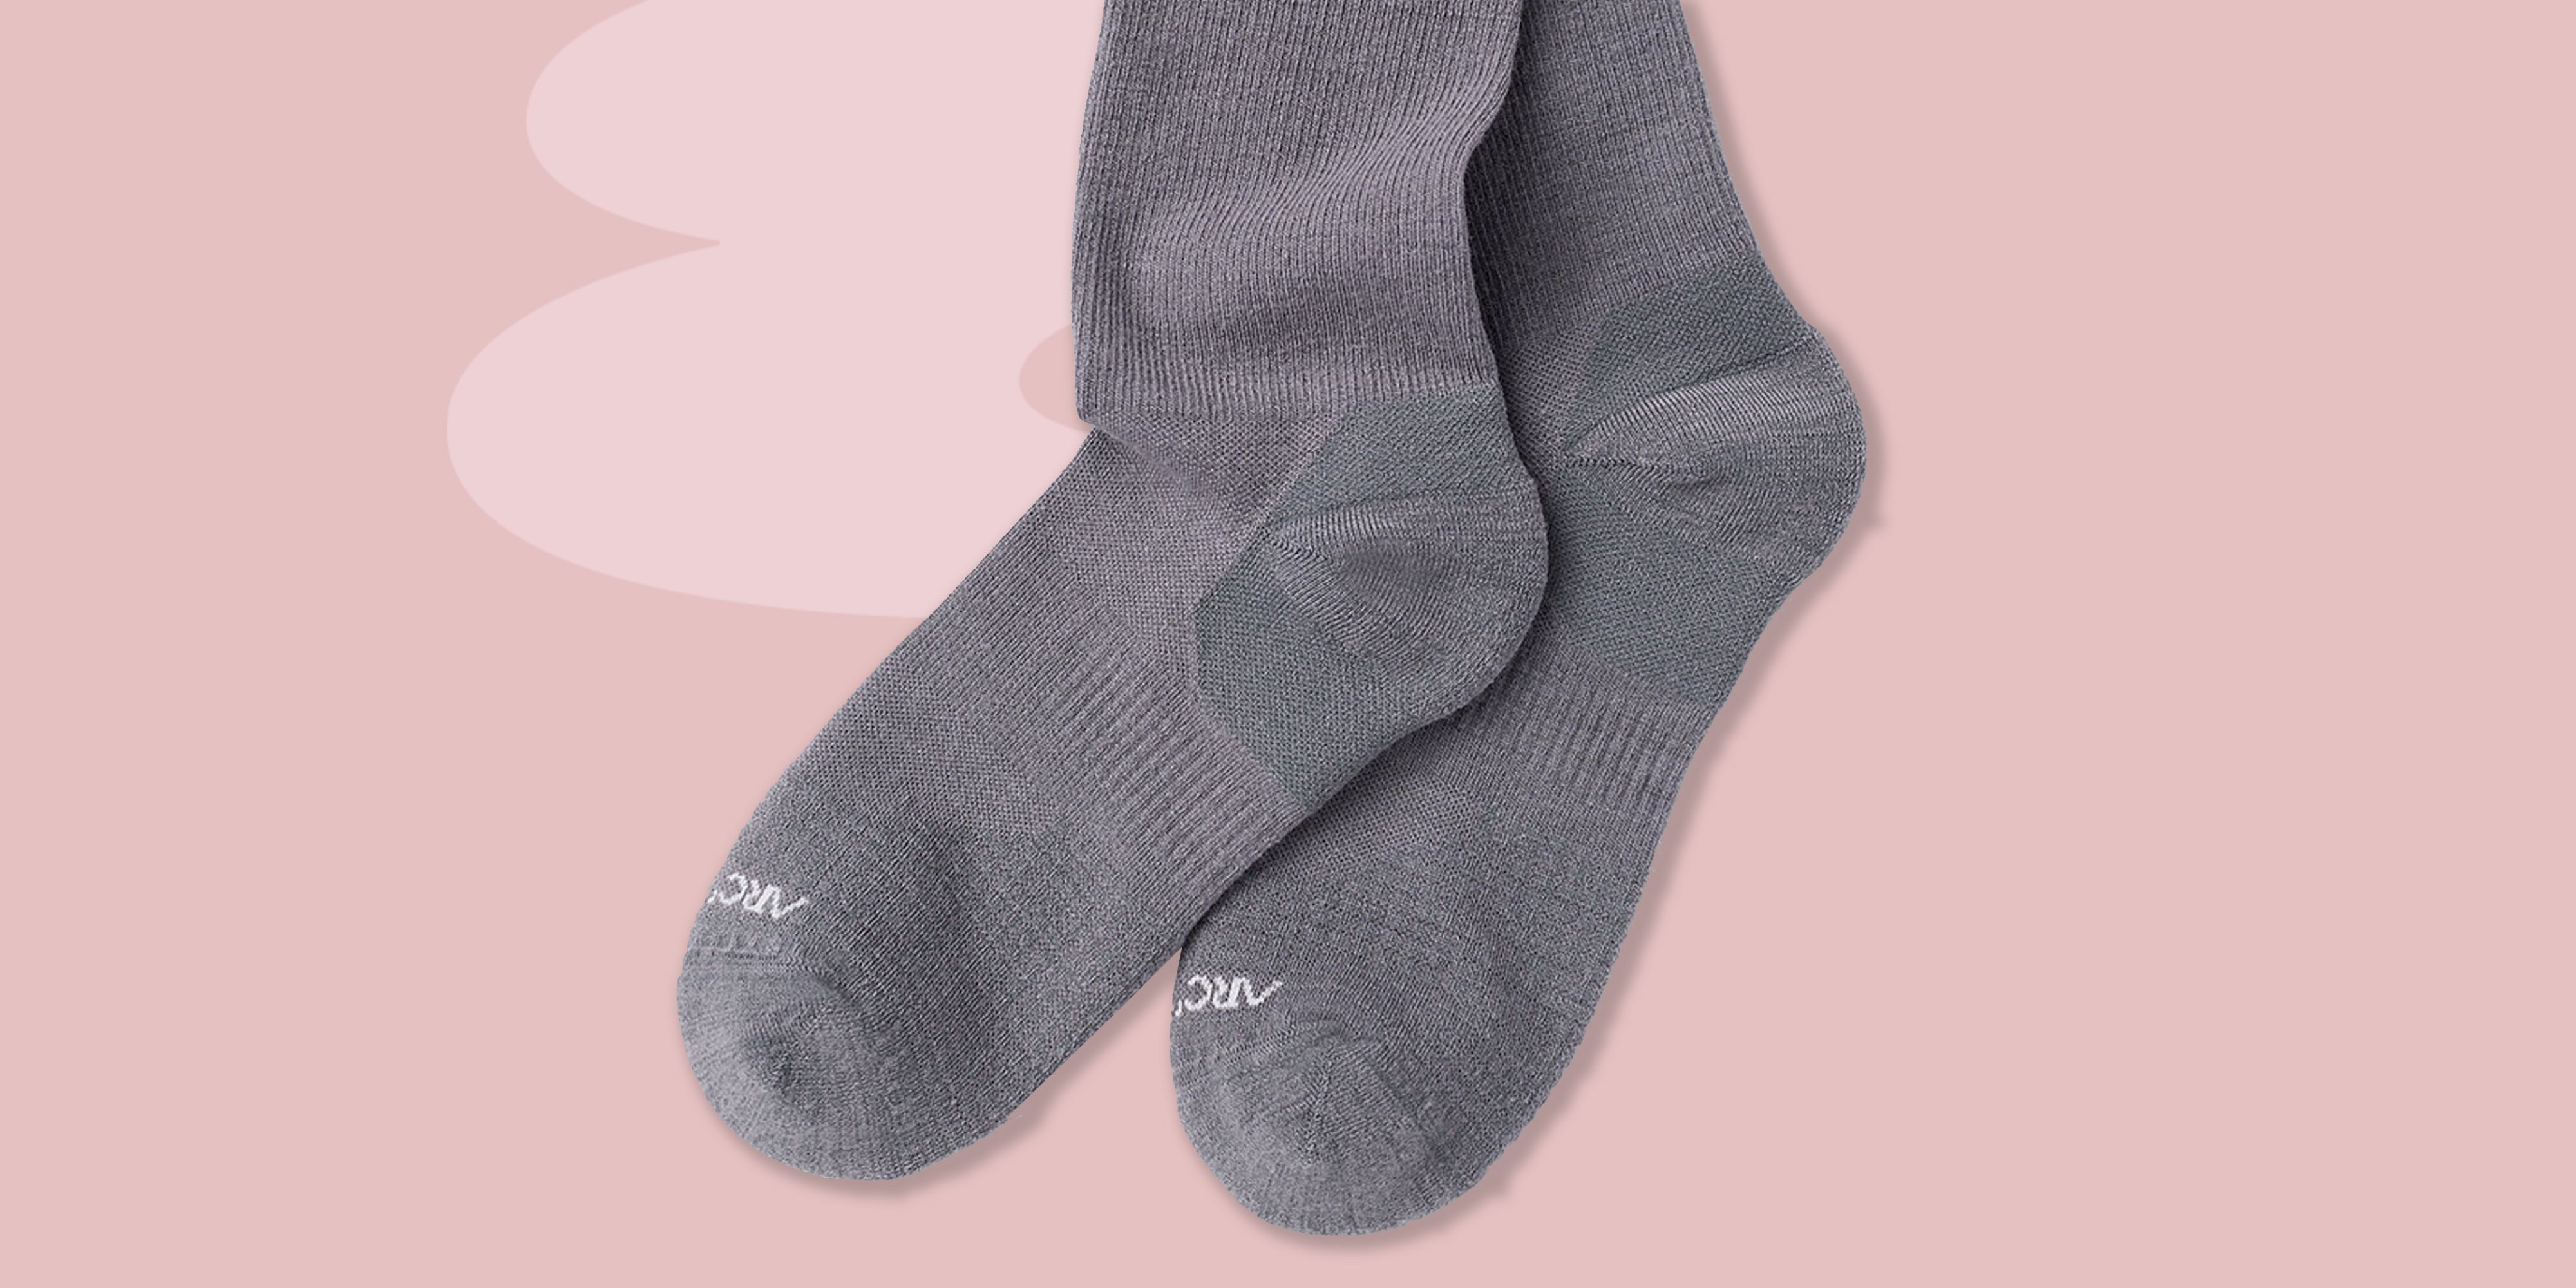 A pair of great wool socks are perfect for any outdoor adventure